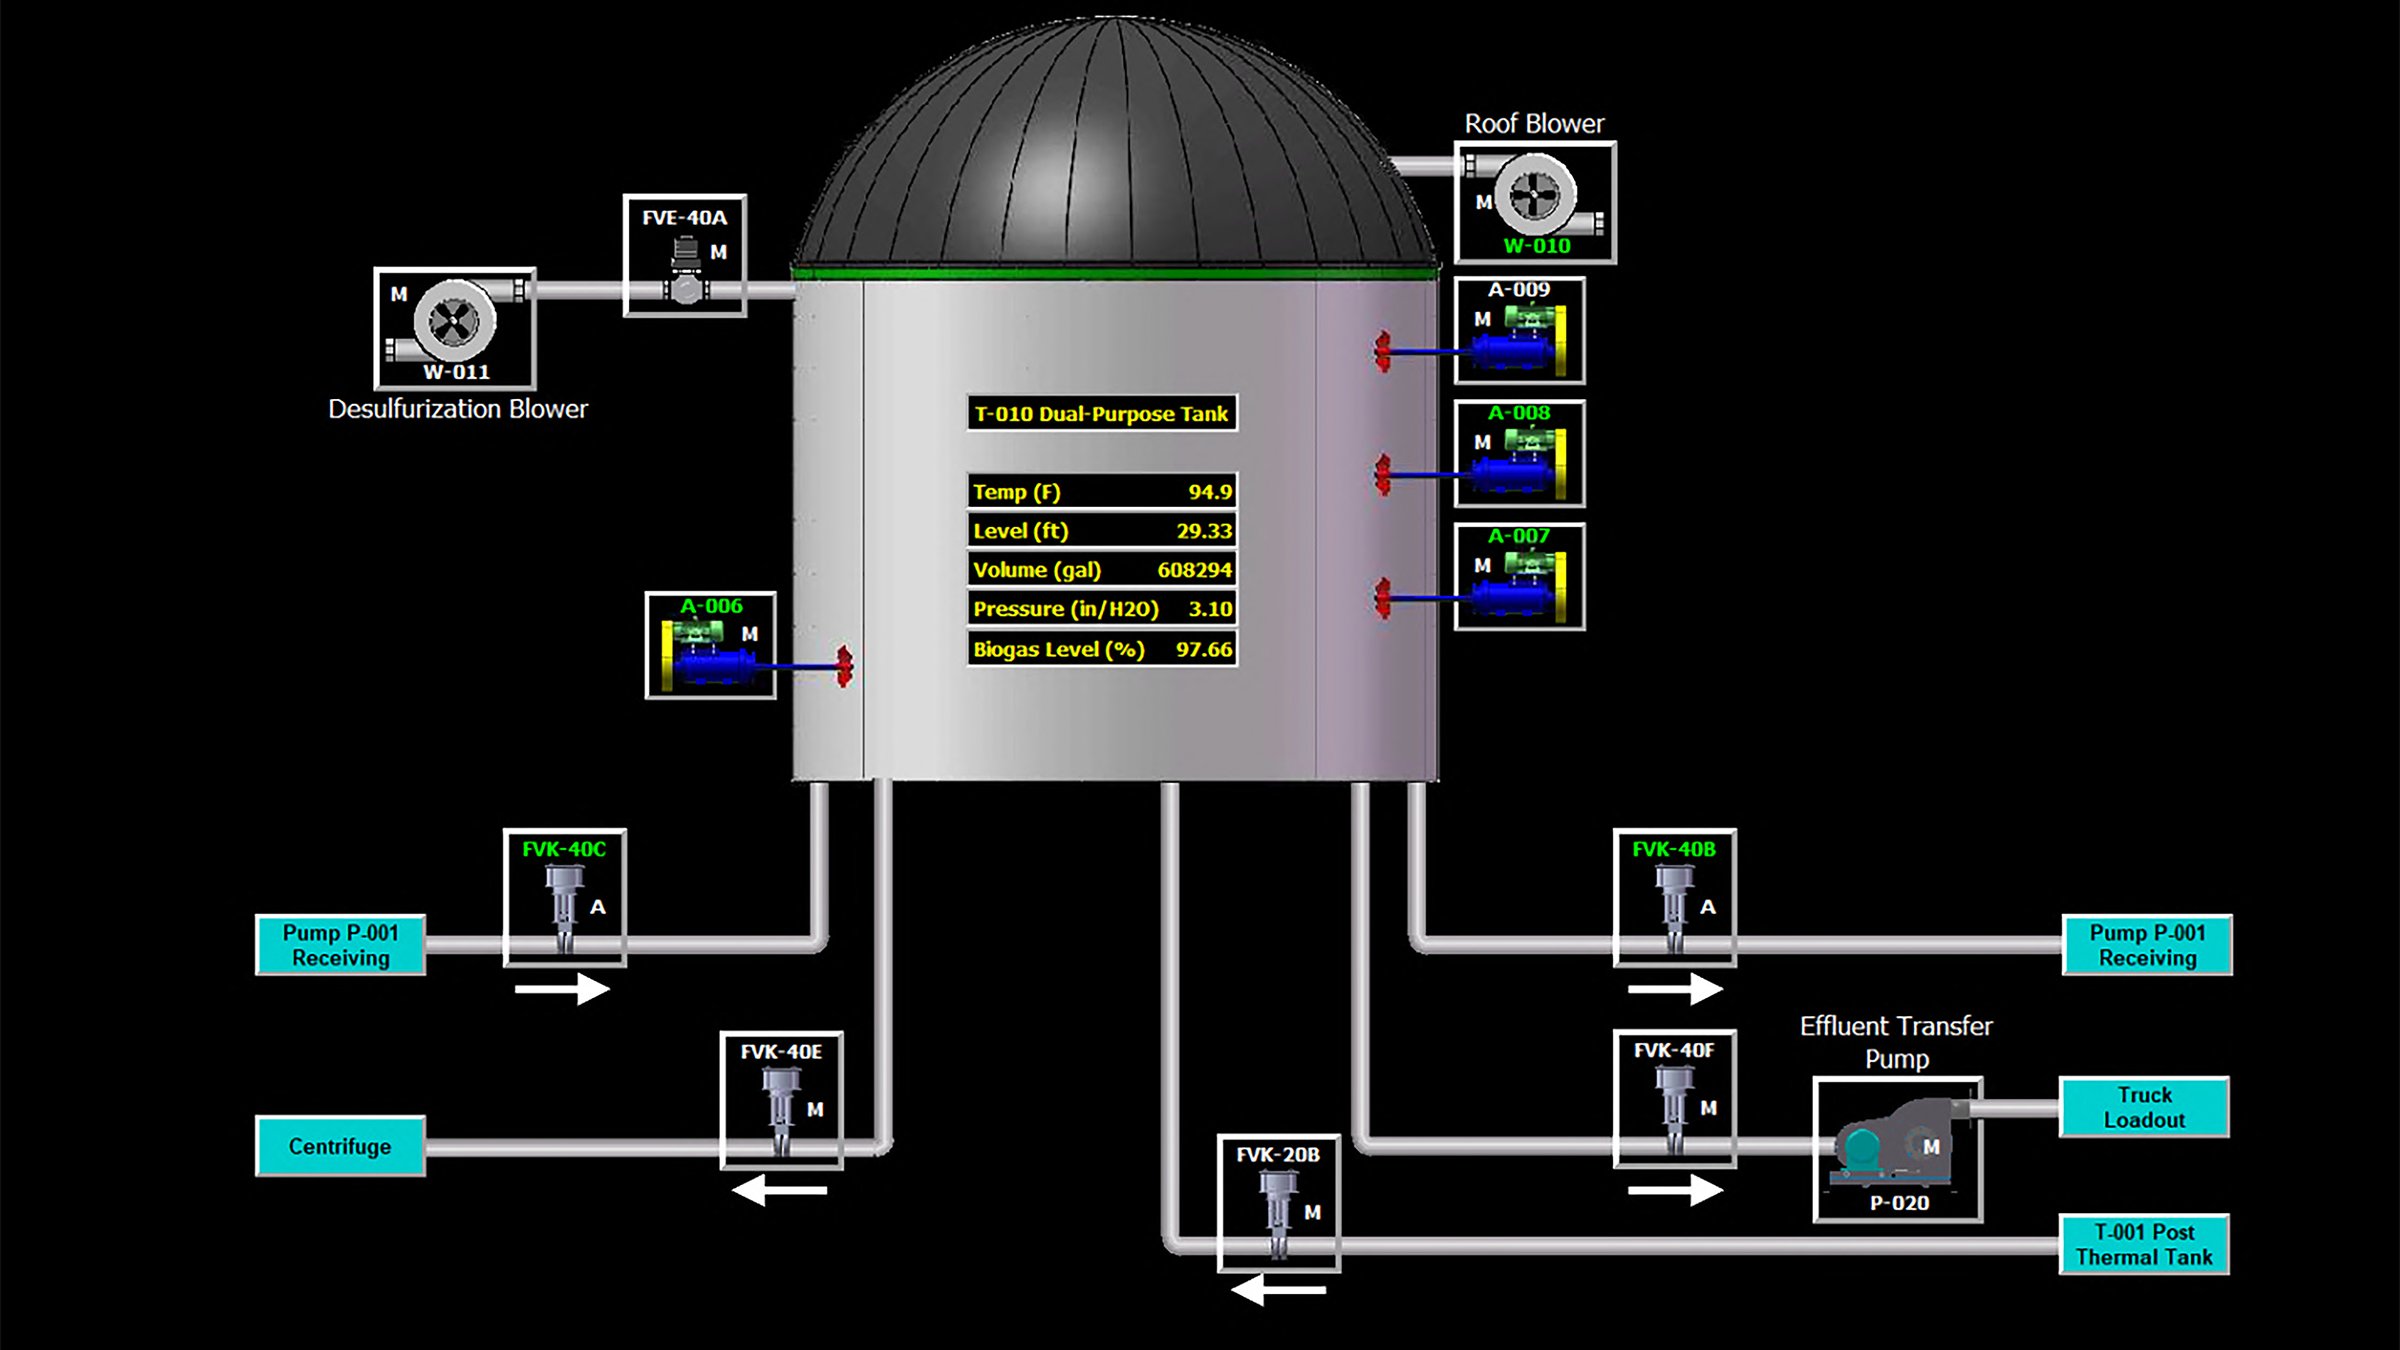 Screen shot of anaerobic digester at Quasar Energy Group that monitors many components with WIN-911 remote alarm notification software.